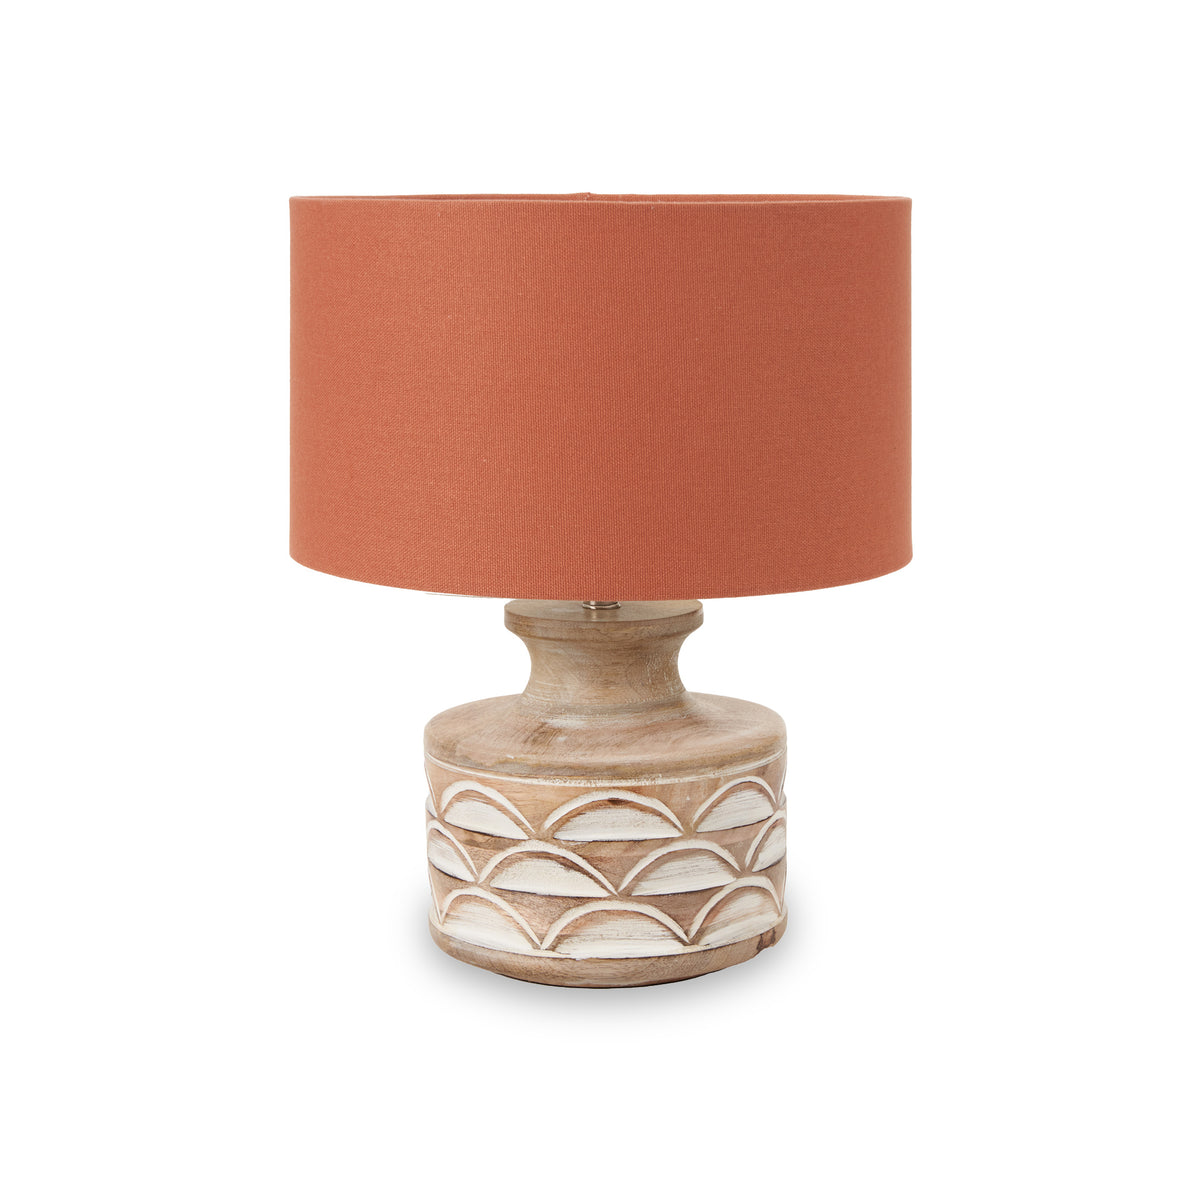 Kingsbury White Wash Carved Wood Table Lamp from Roseland Furniture